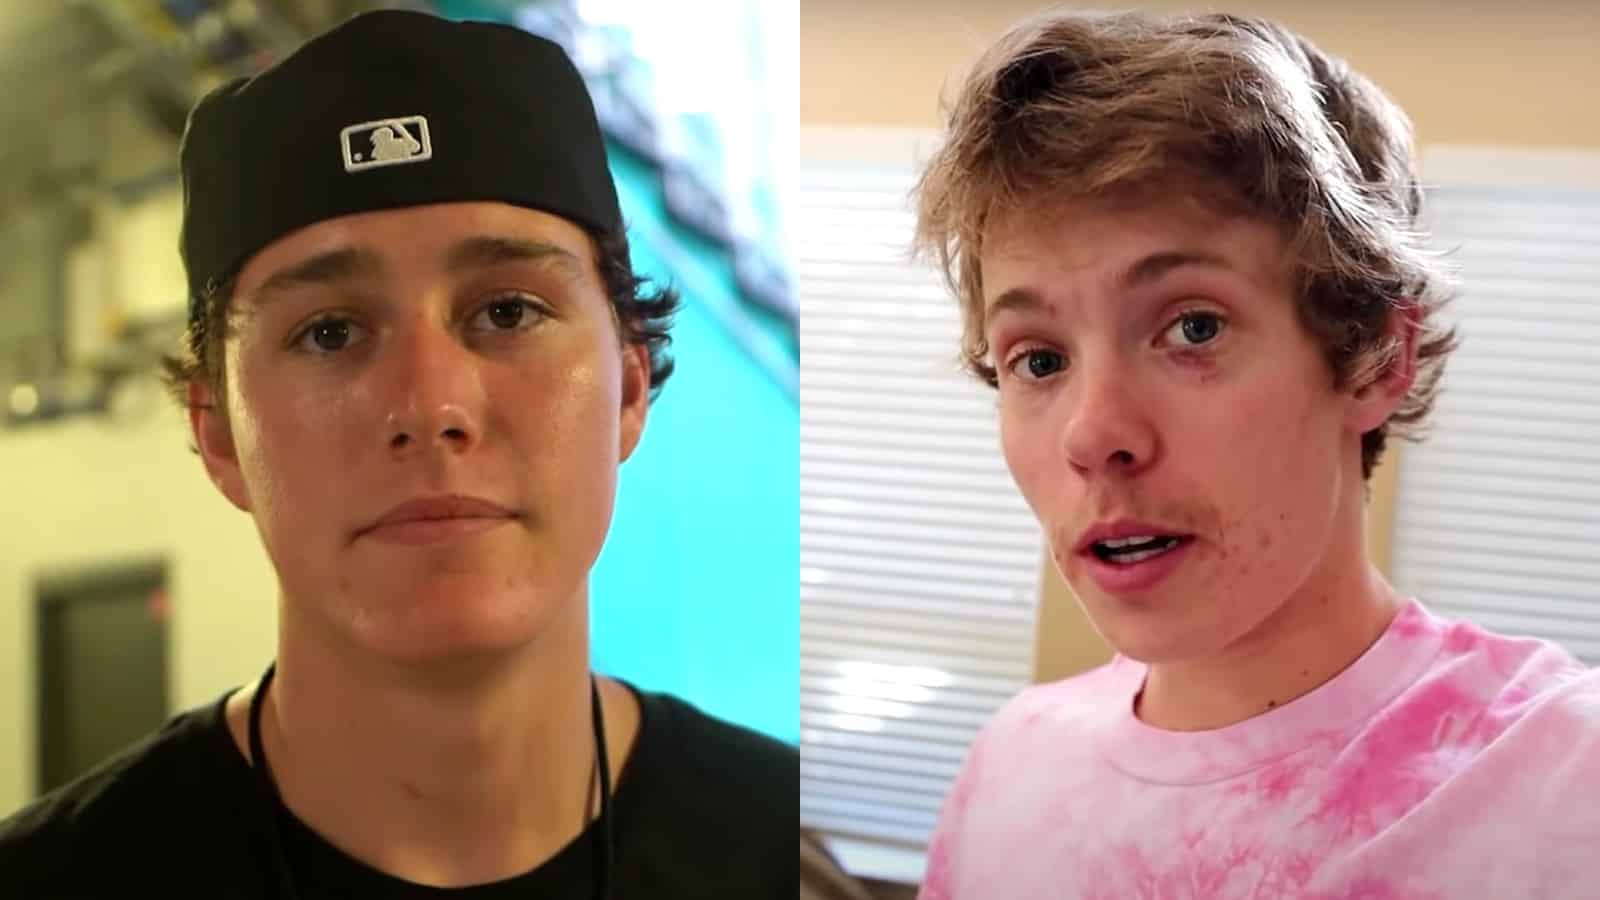 Ryland Storms and Tanner Fox in their YouTube videos